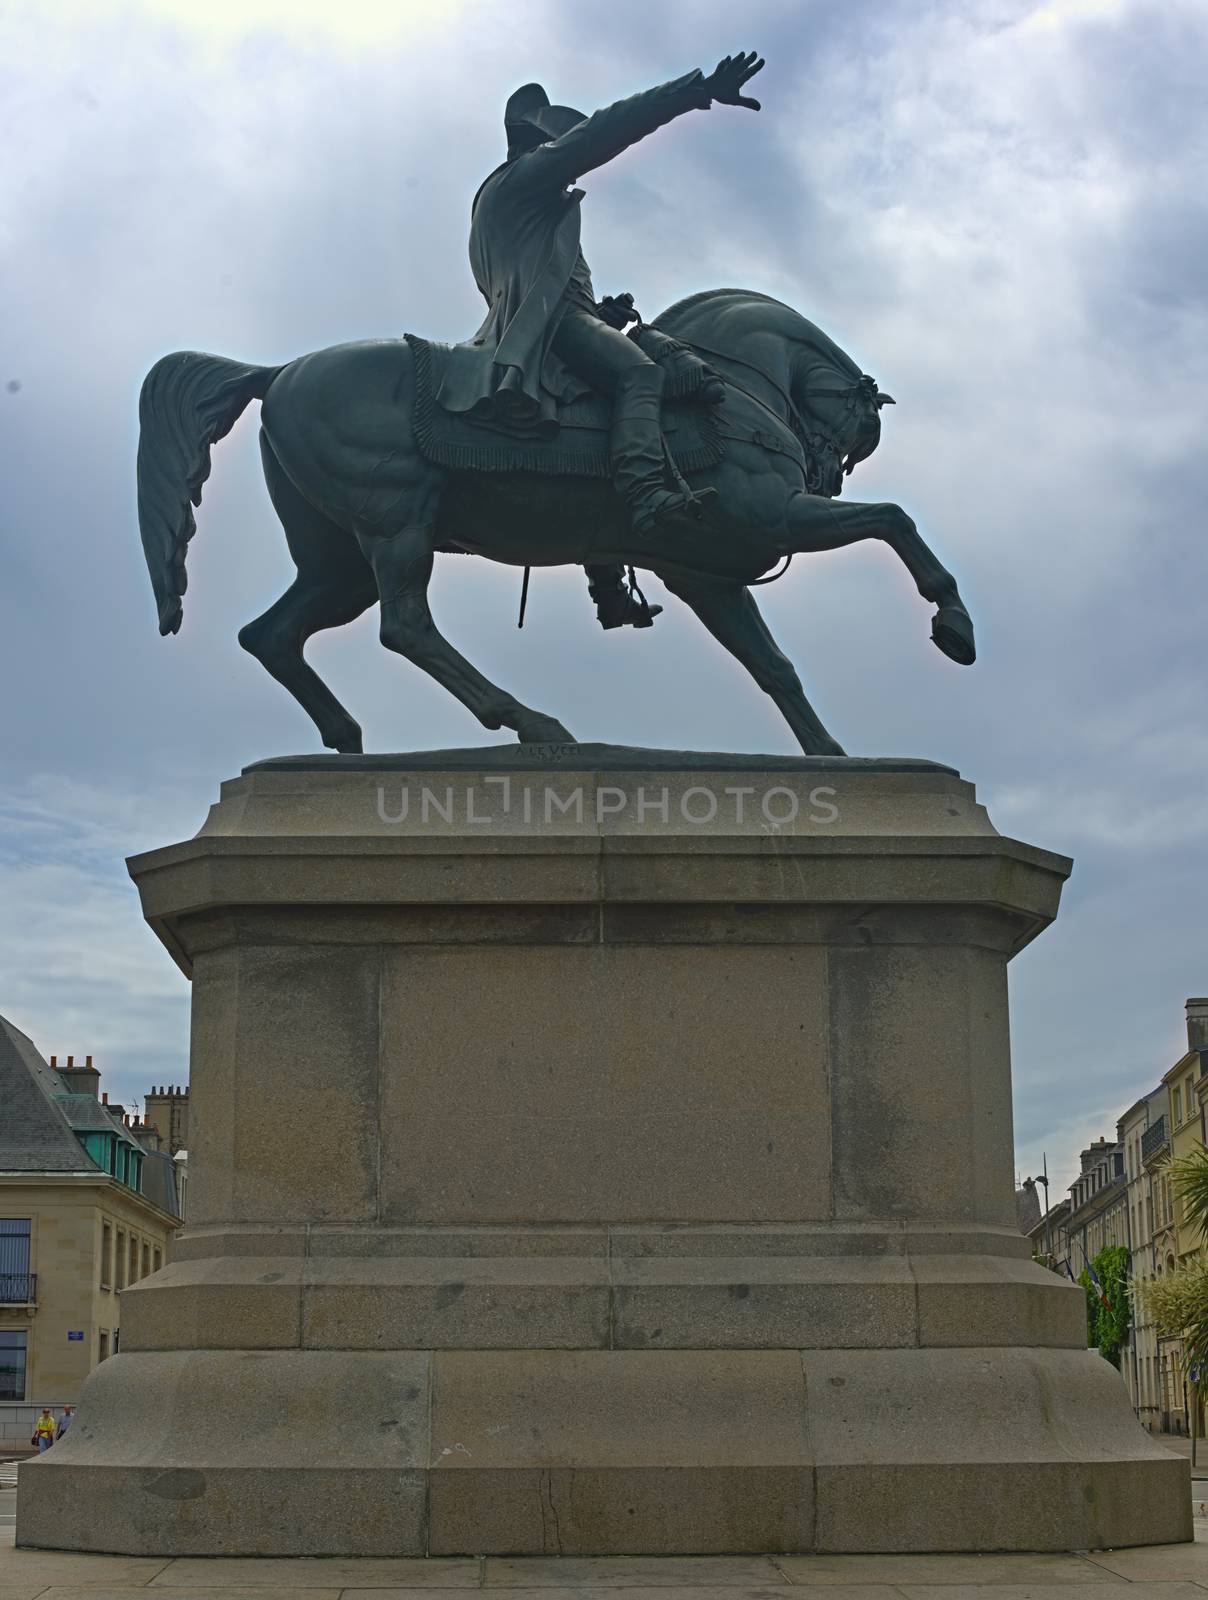 Huge monument of Napoleon on a horse in Cherbourg, France by sheriffkule